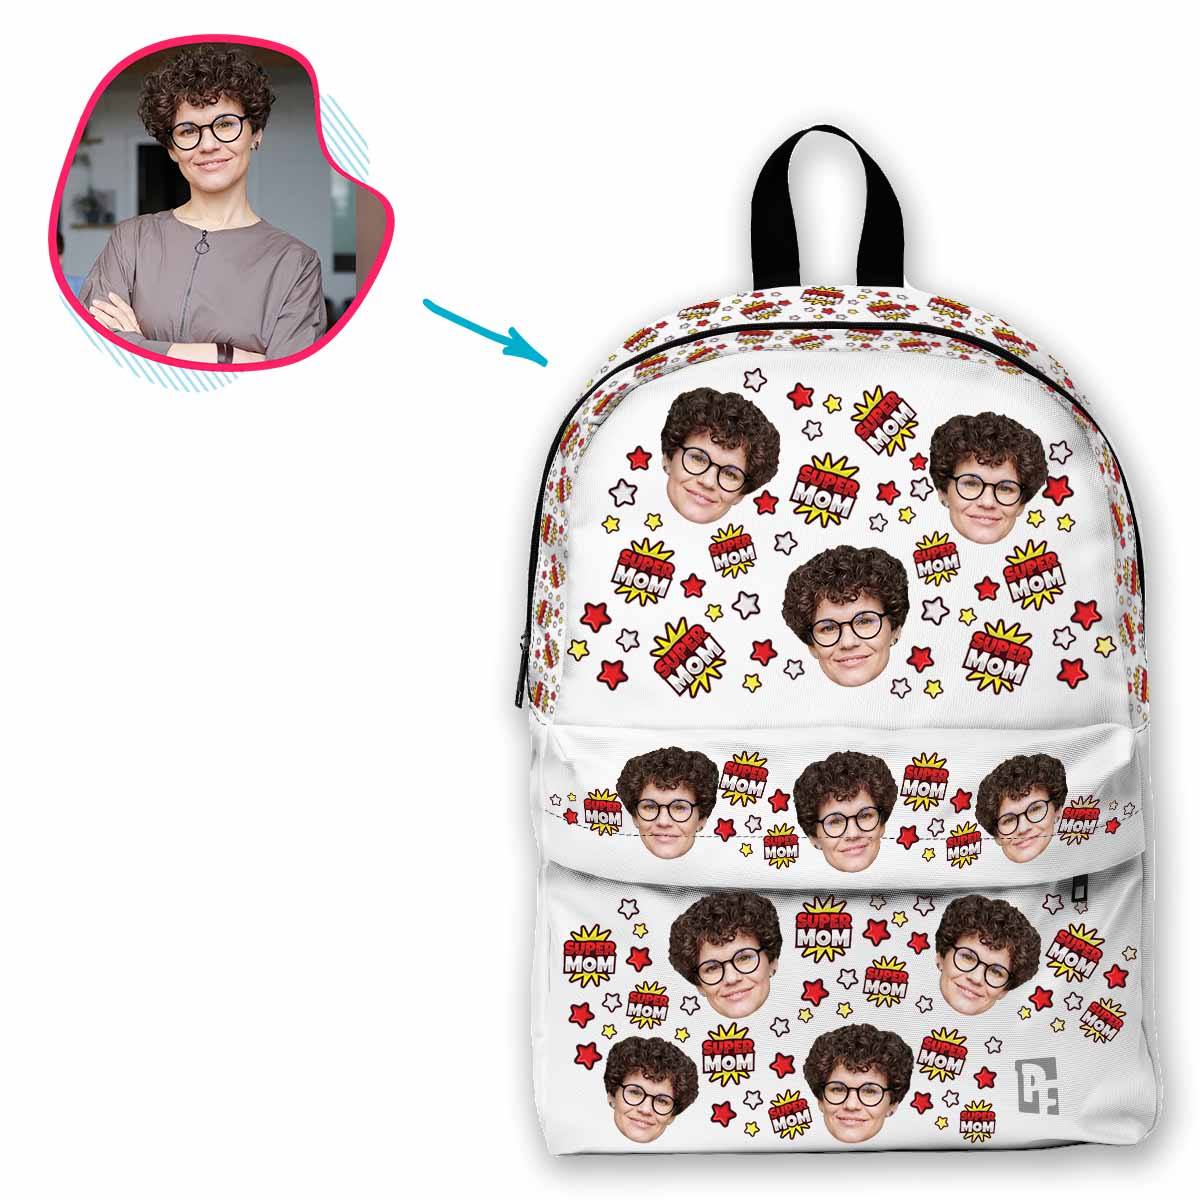 white Super Mom classic backpack personalized with photo of face printed on it